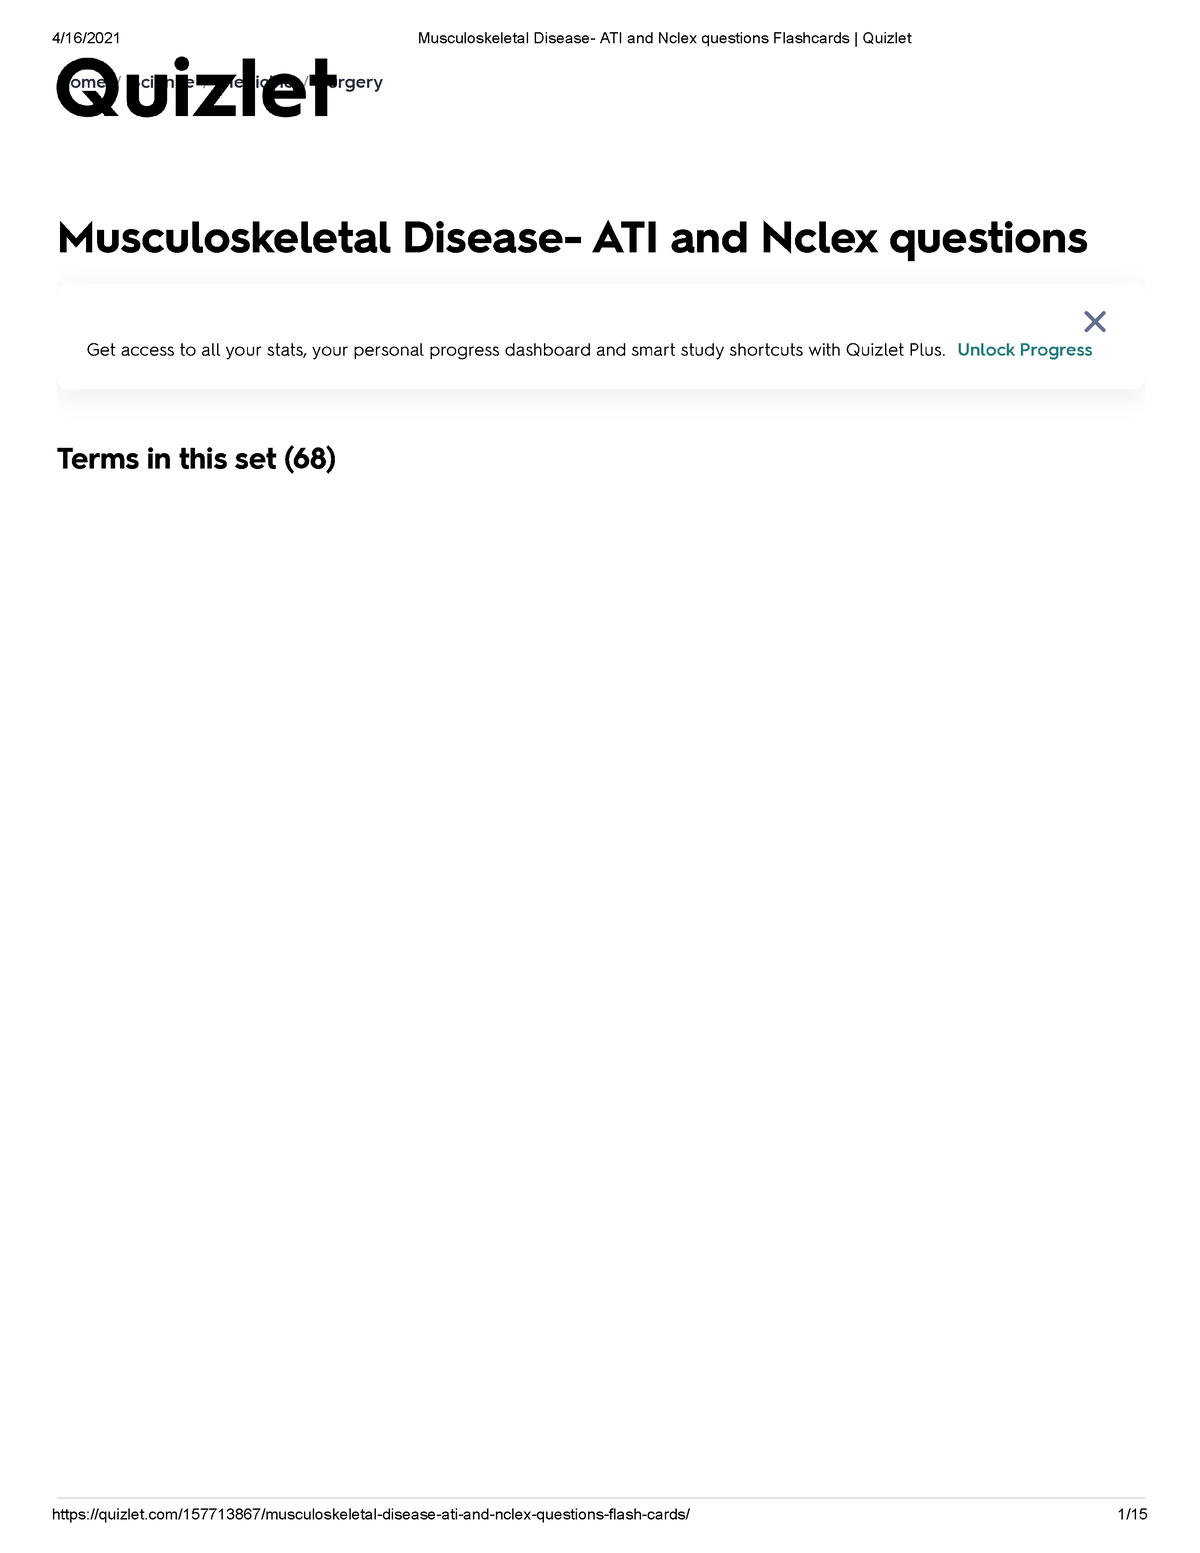 Musculoskeletal Disease ATI and Nclex questions Flashcards Quizlet